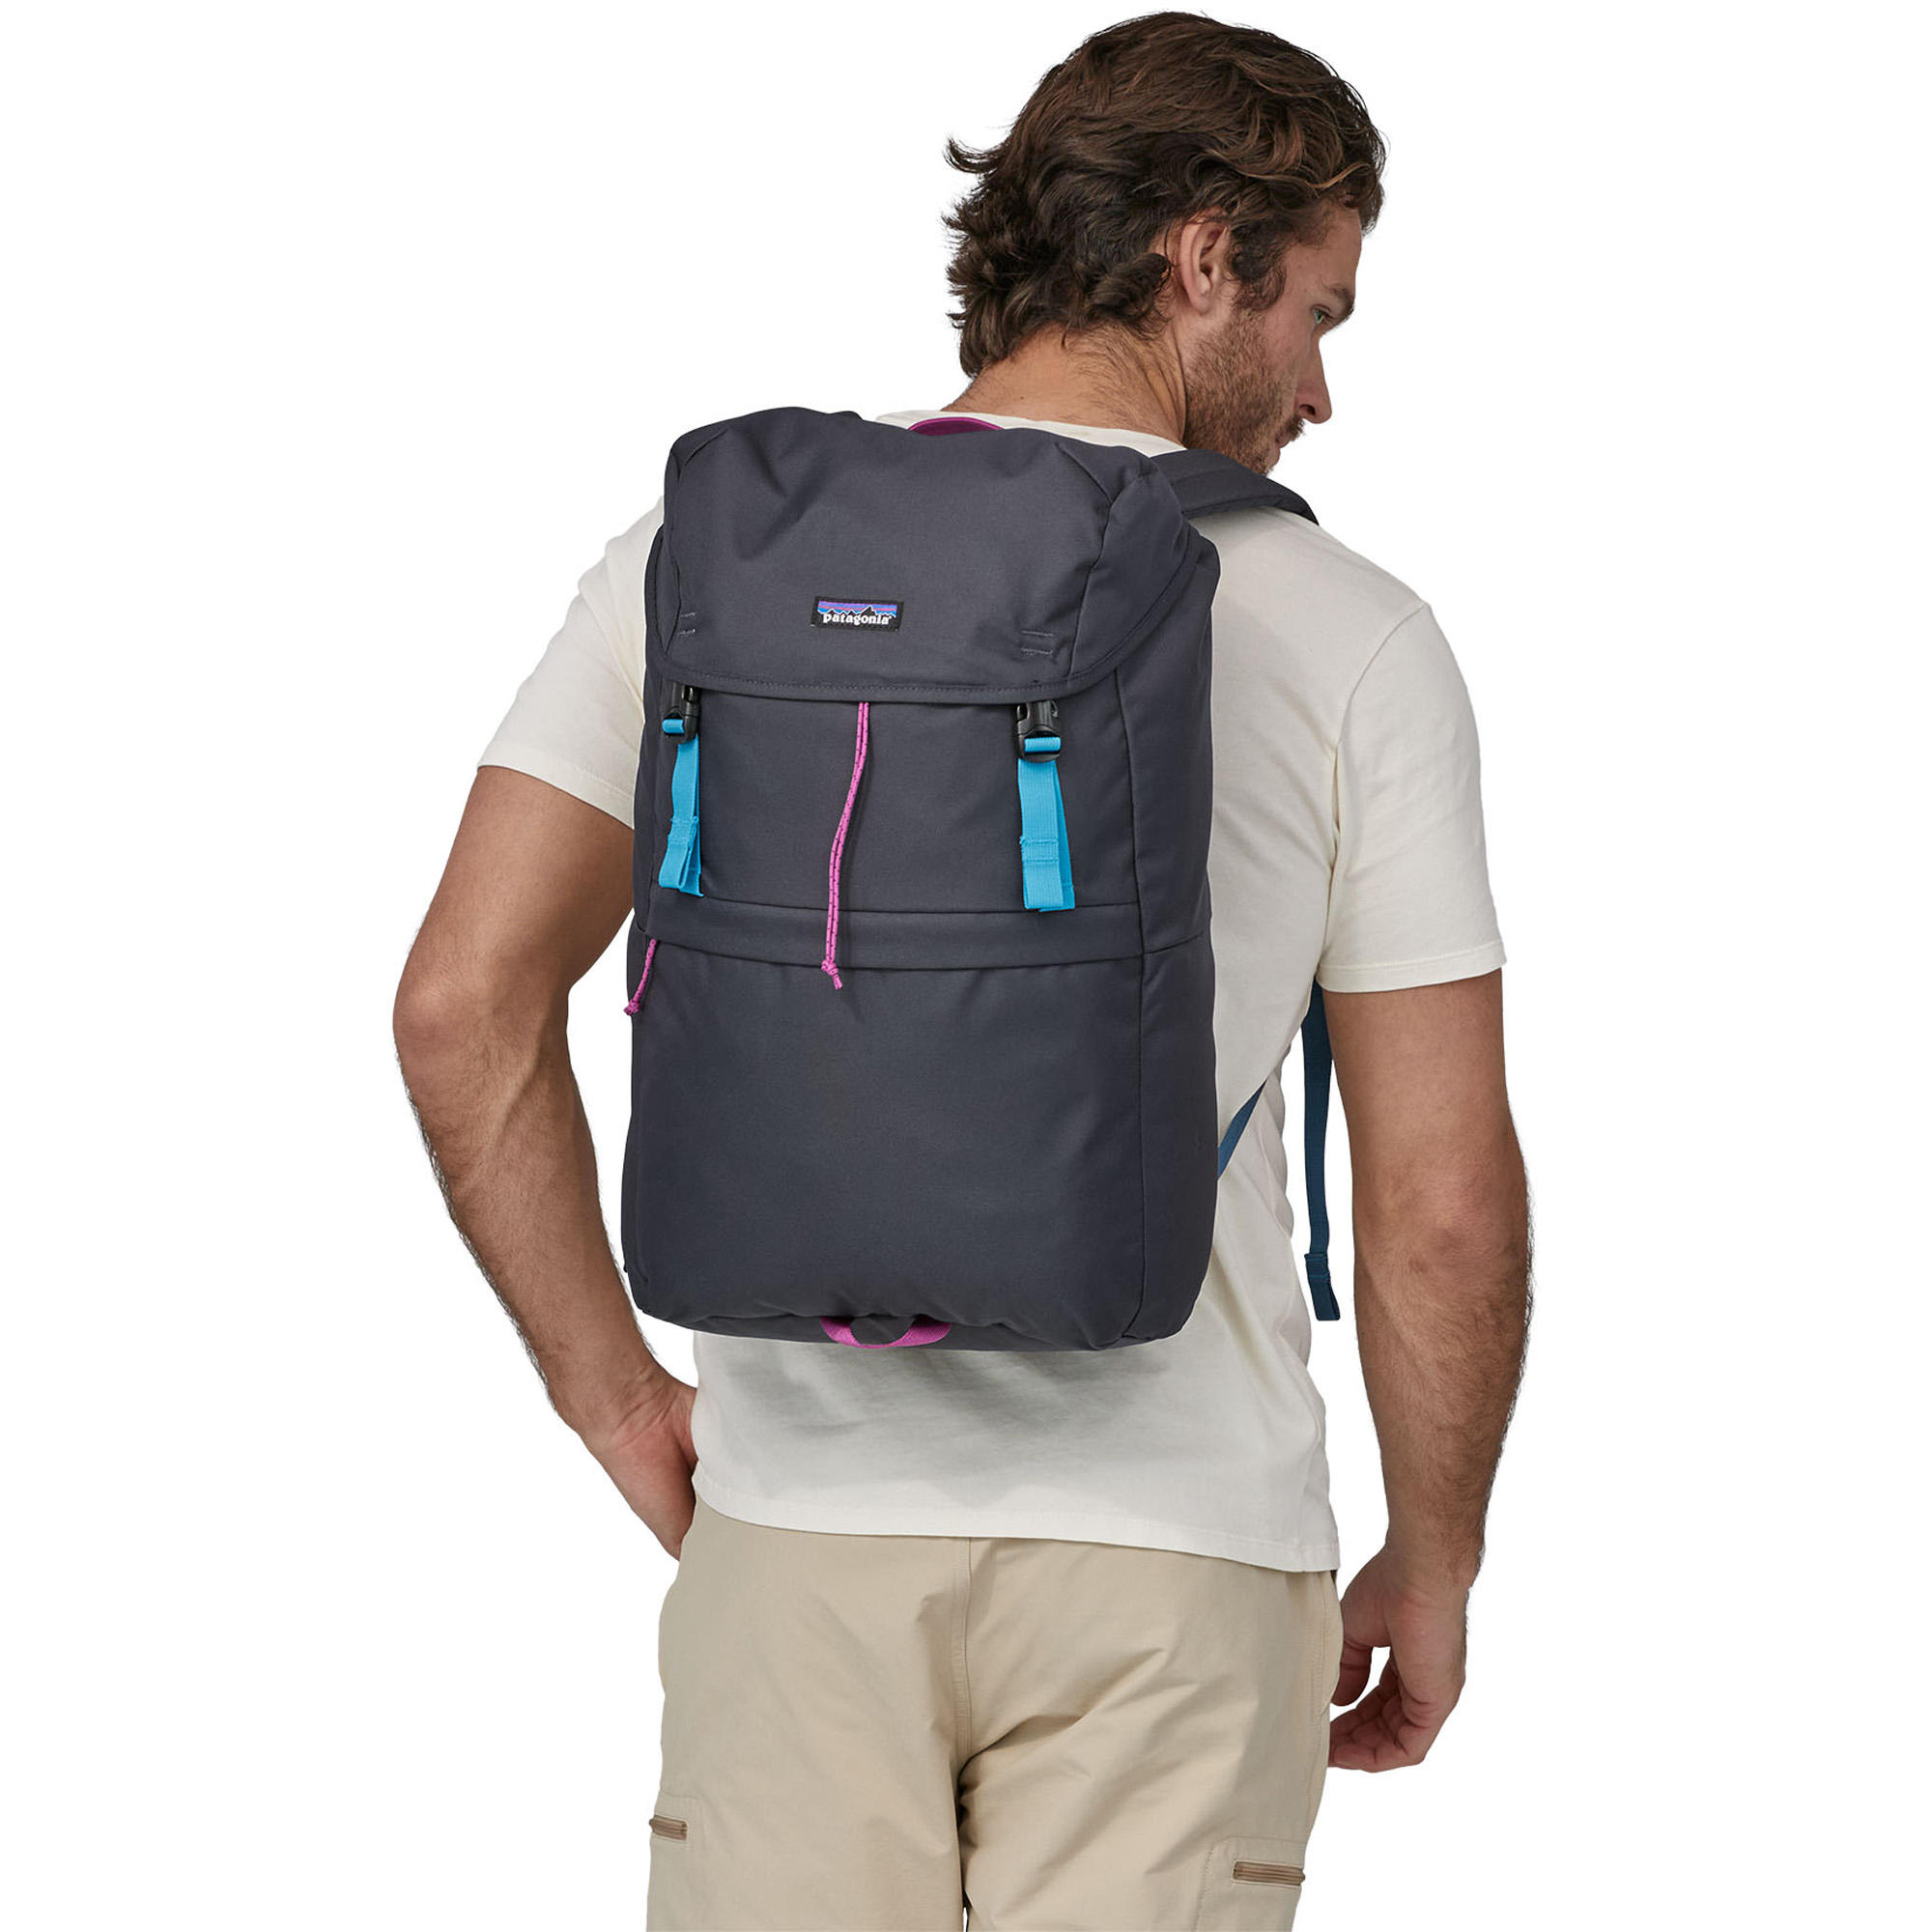 Patagonia Fieldsmith Lid 28 Backpack/Day Pack